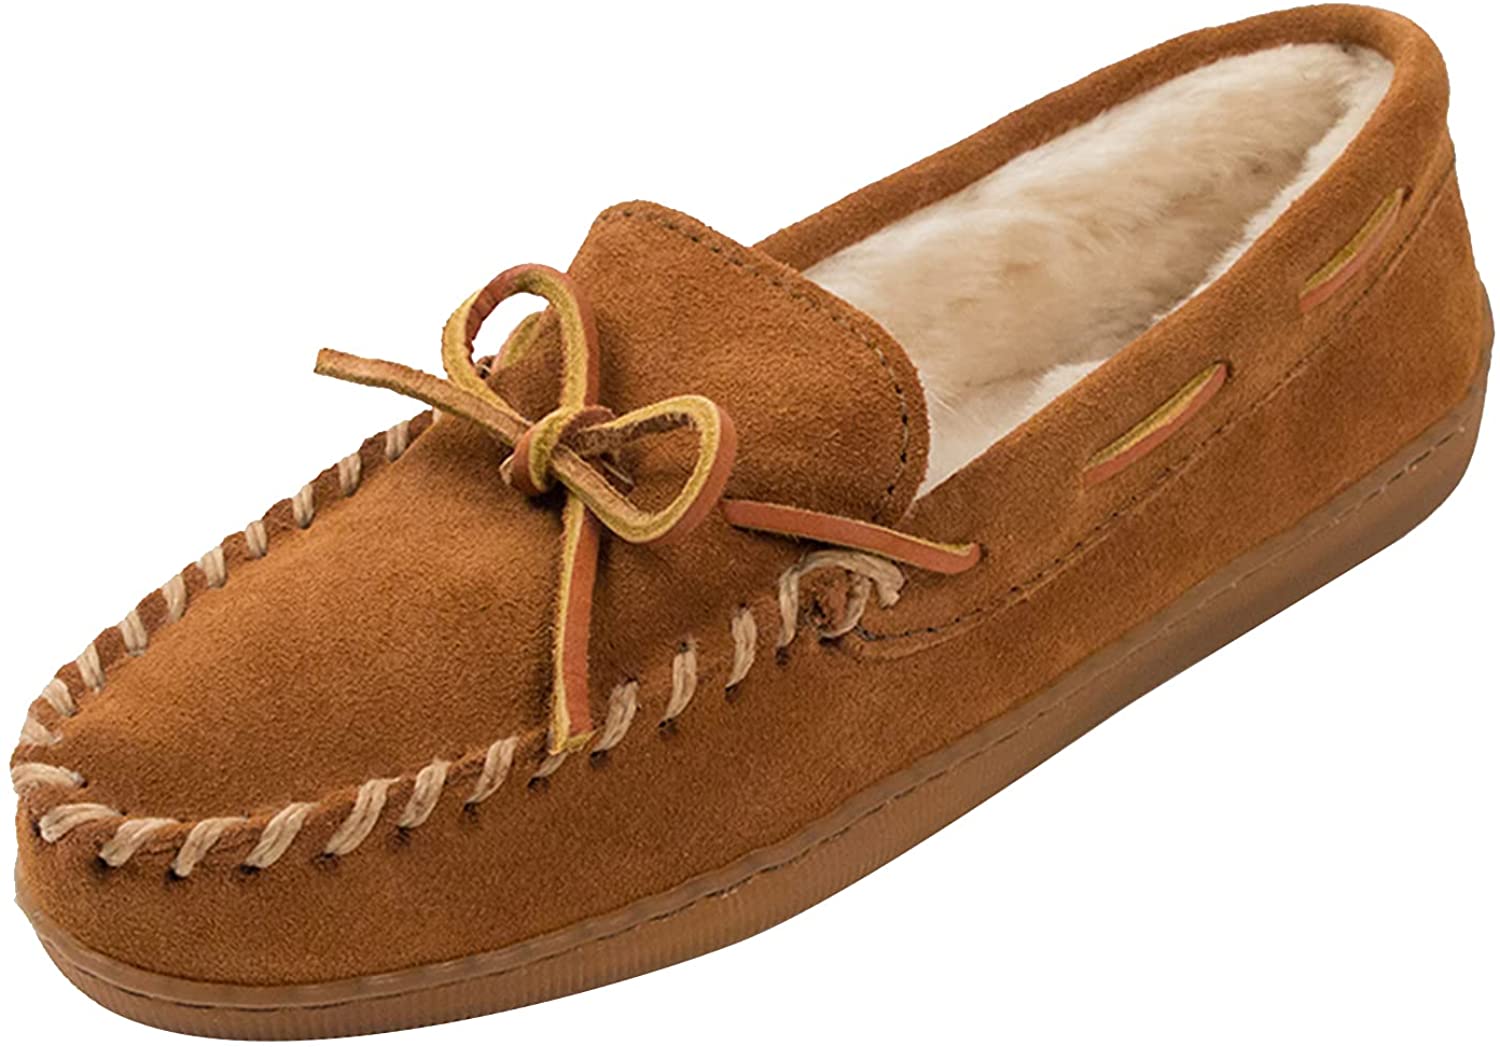 Women's Pile-Lined Moccasin Slippers | eBay